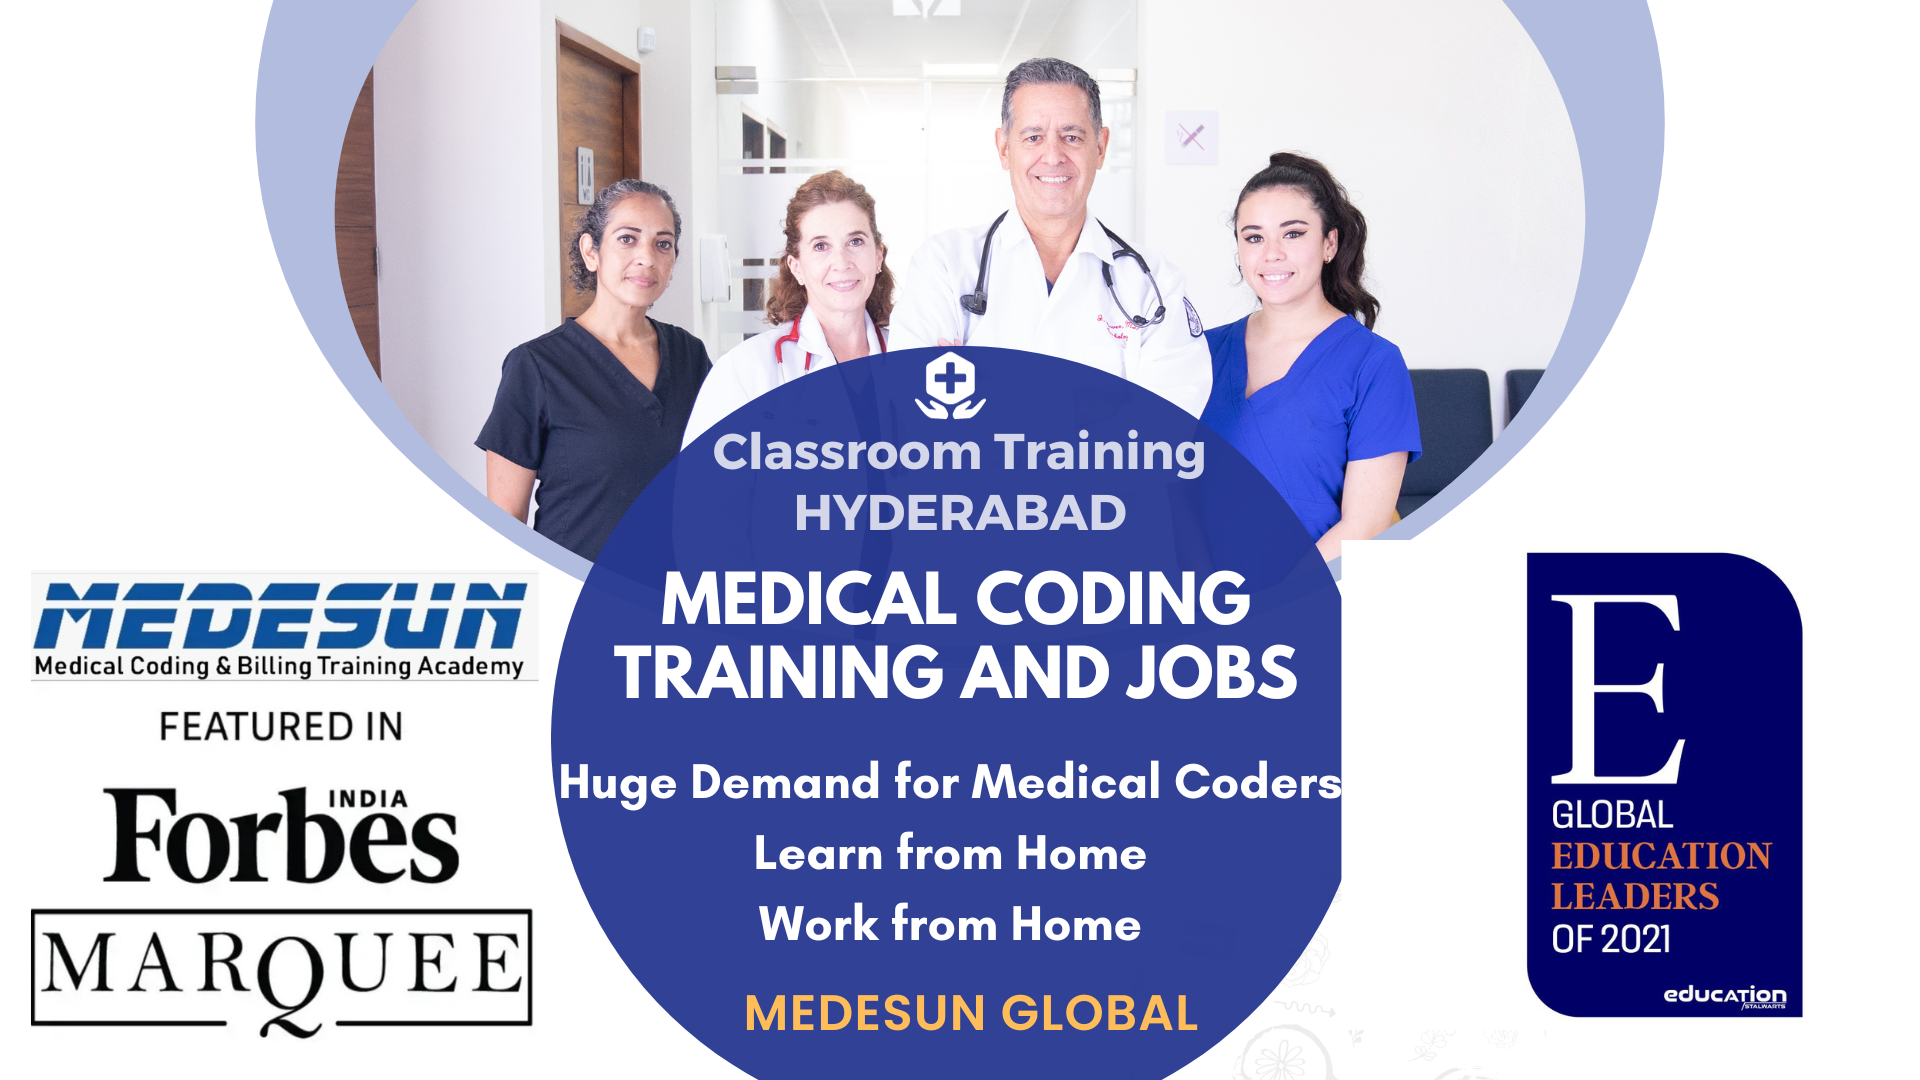 Classroom Training
HYDERABAD

   

     

nomen arnens MEV) (of Veo
AAR EA CTY Tes

an Huge Demand for Medical Coders]

Forbés Learn from Home

M A RQU E E Work from Home
MEDESUN GLOBAL

(C{H0]:AN

OF 2021

education